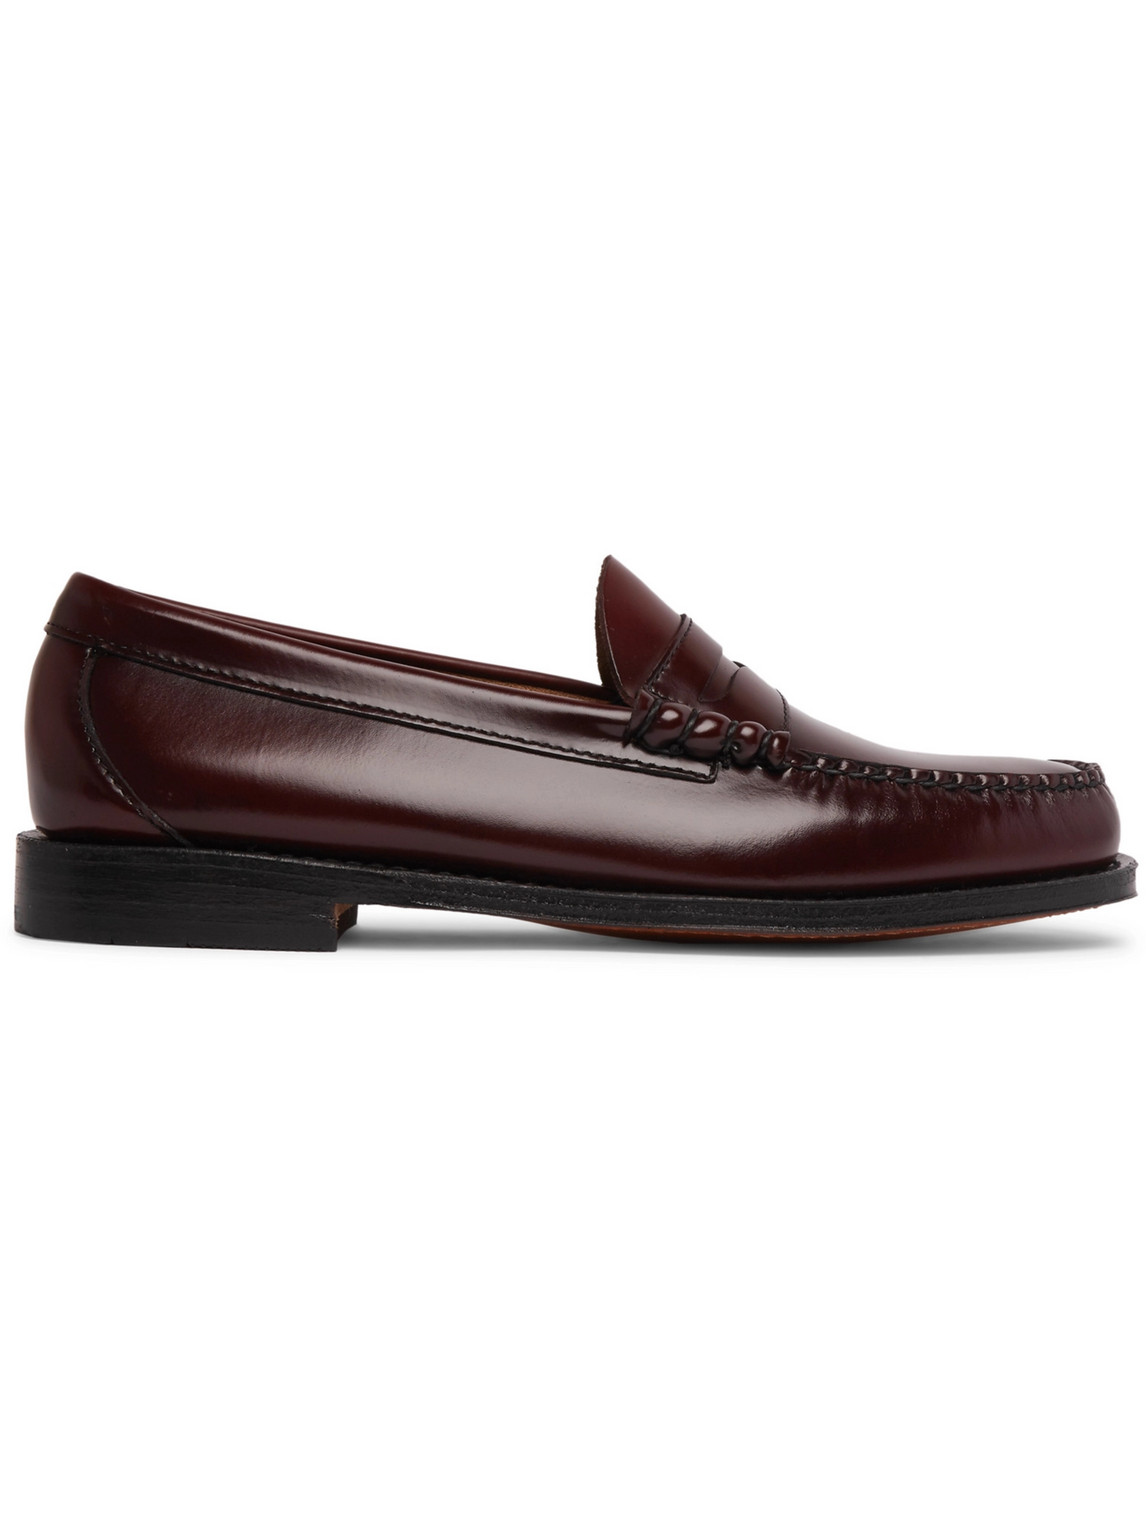 G.H. Bass & Co. - Weejuns Heritage Larson Leather Penny Loafers - Men - Burgundy - UK 7 von G.H. Bass & Co.